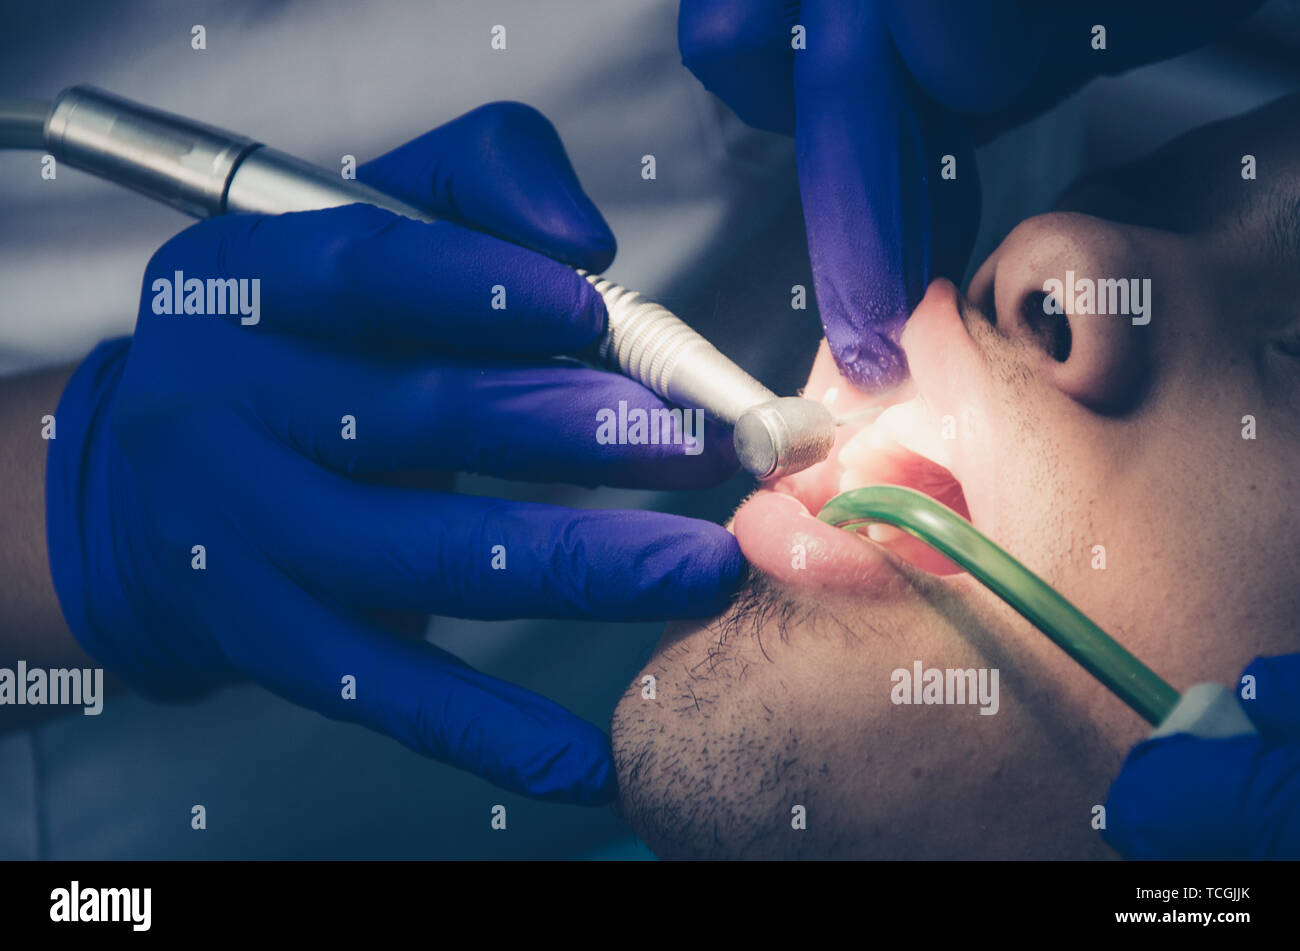 Seated young man is being examined his teeth by a dentist Stock Photo